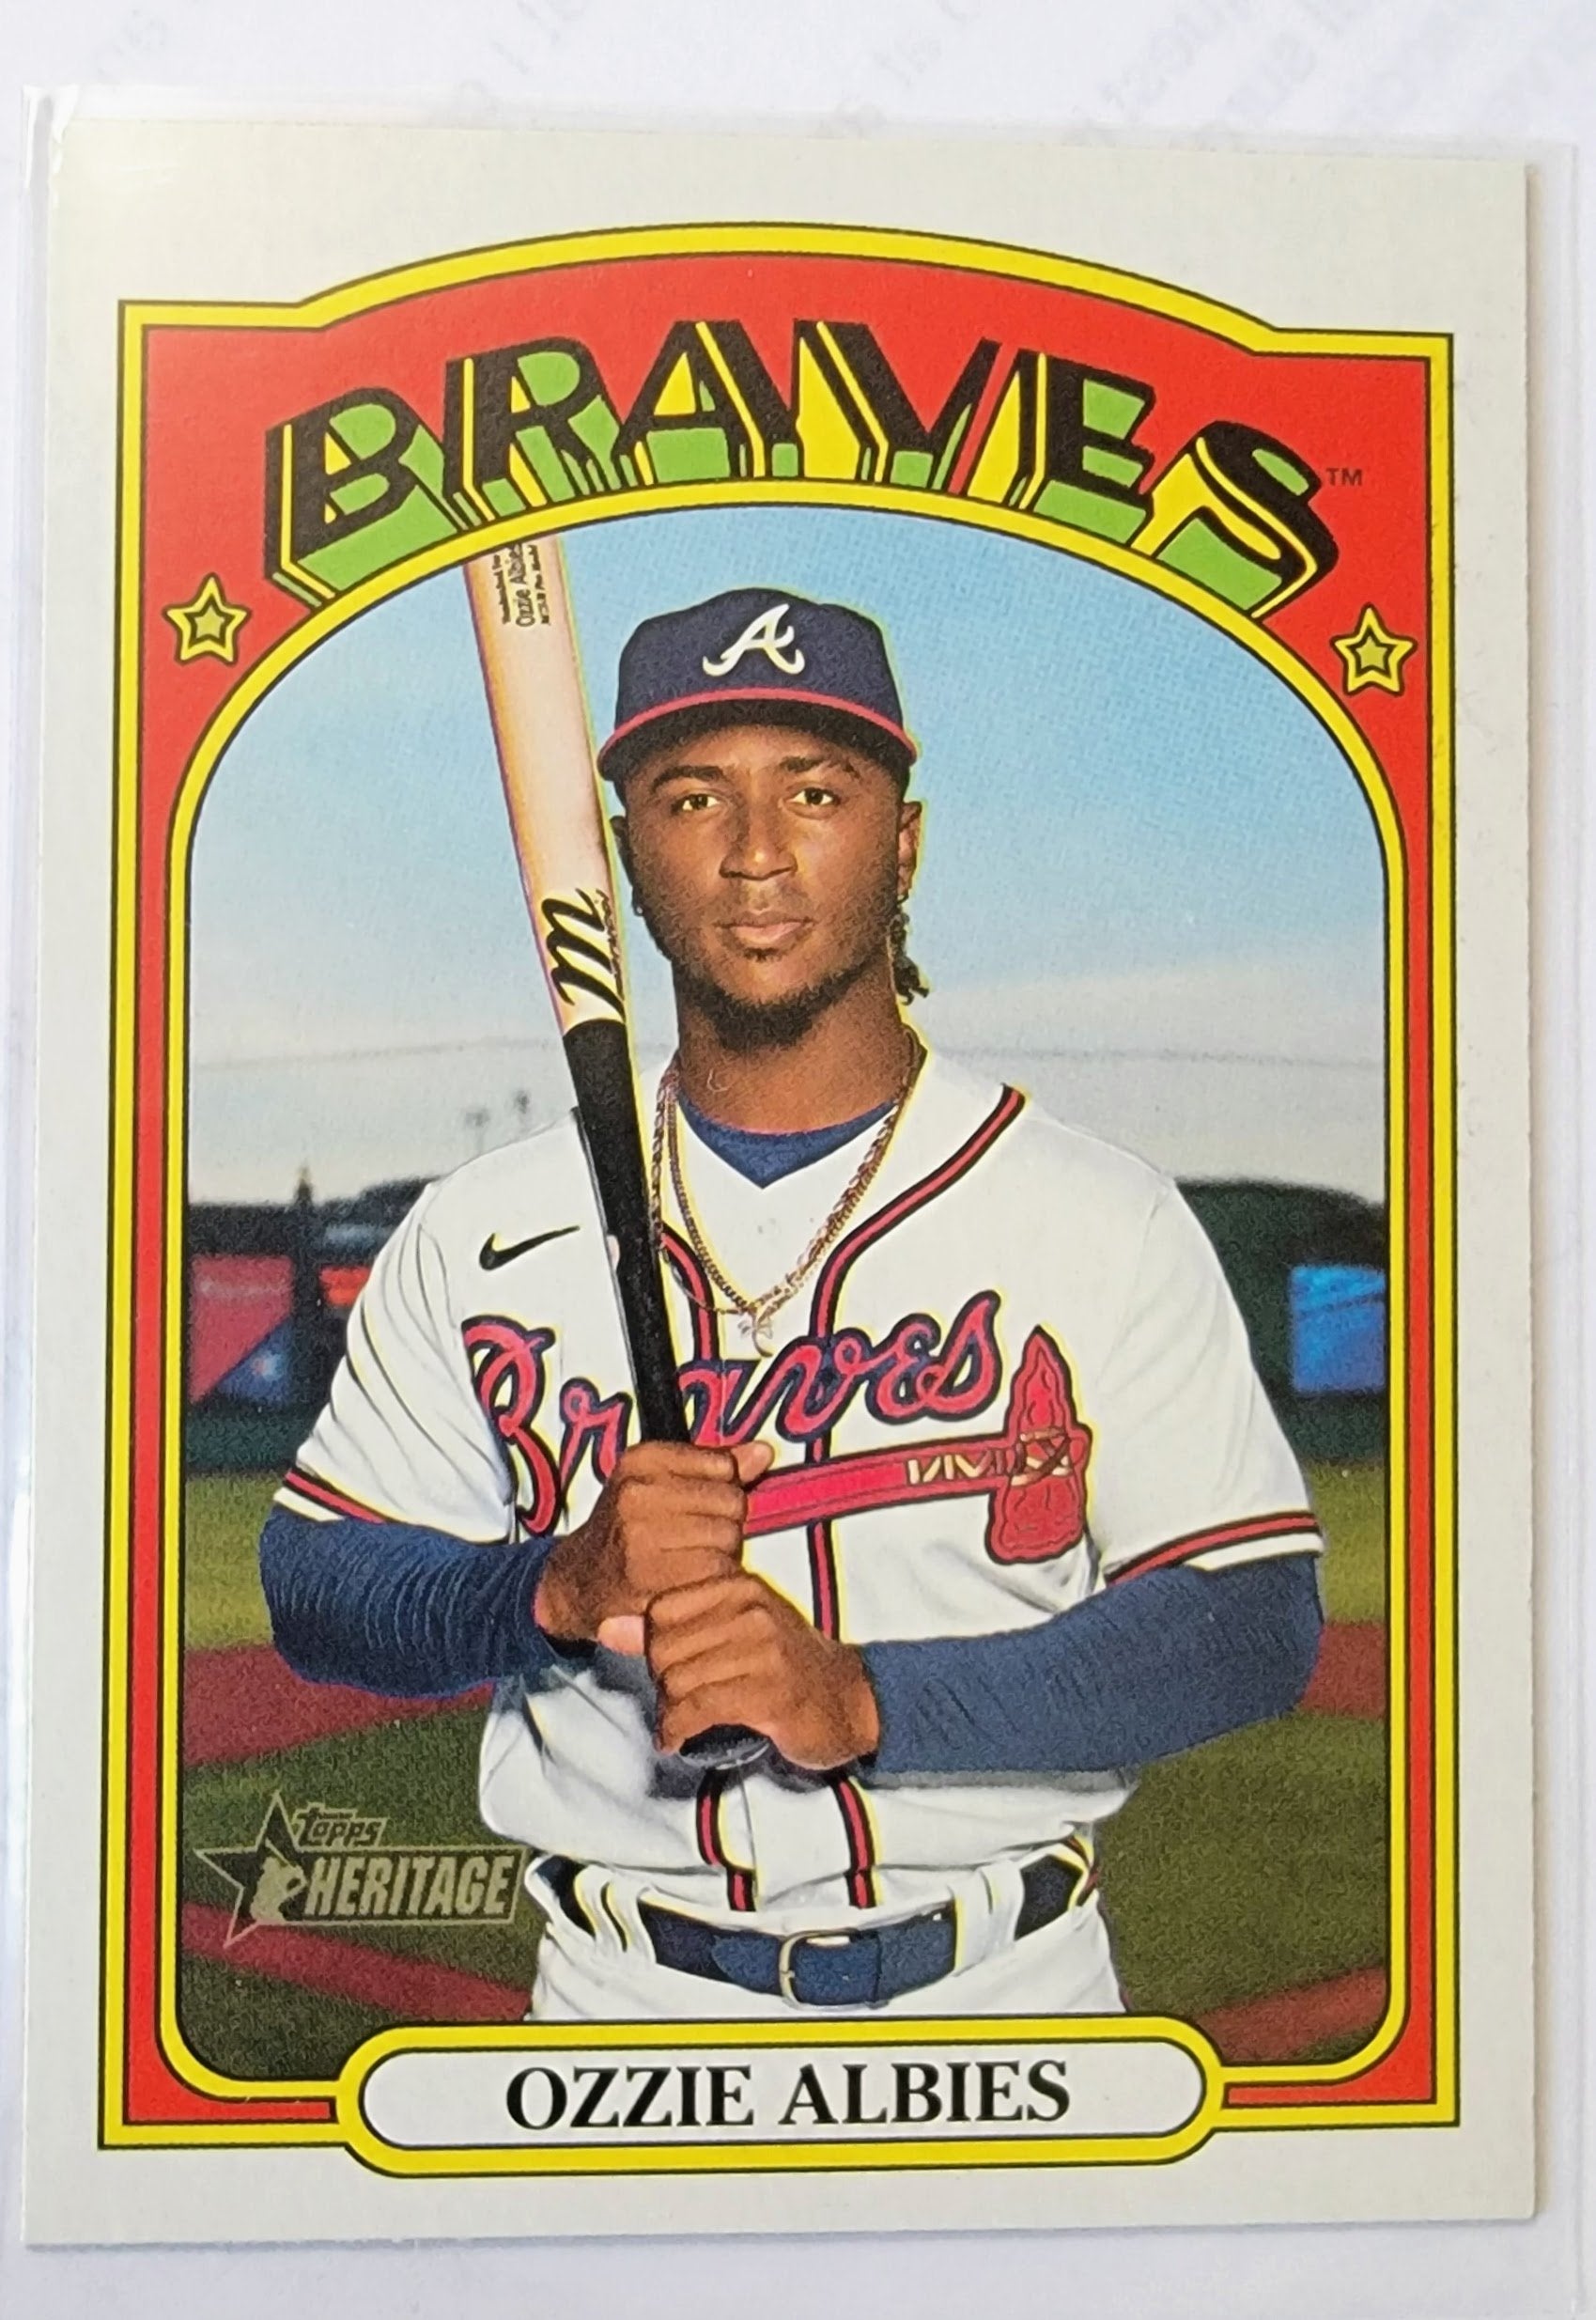 2021 Topps Heritage Ozzie Albies Baseball Trading Card MCSC1 simple Xclusive Collectibles   